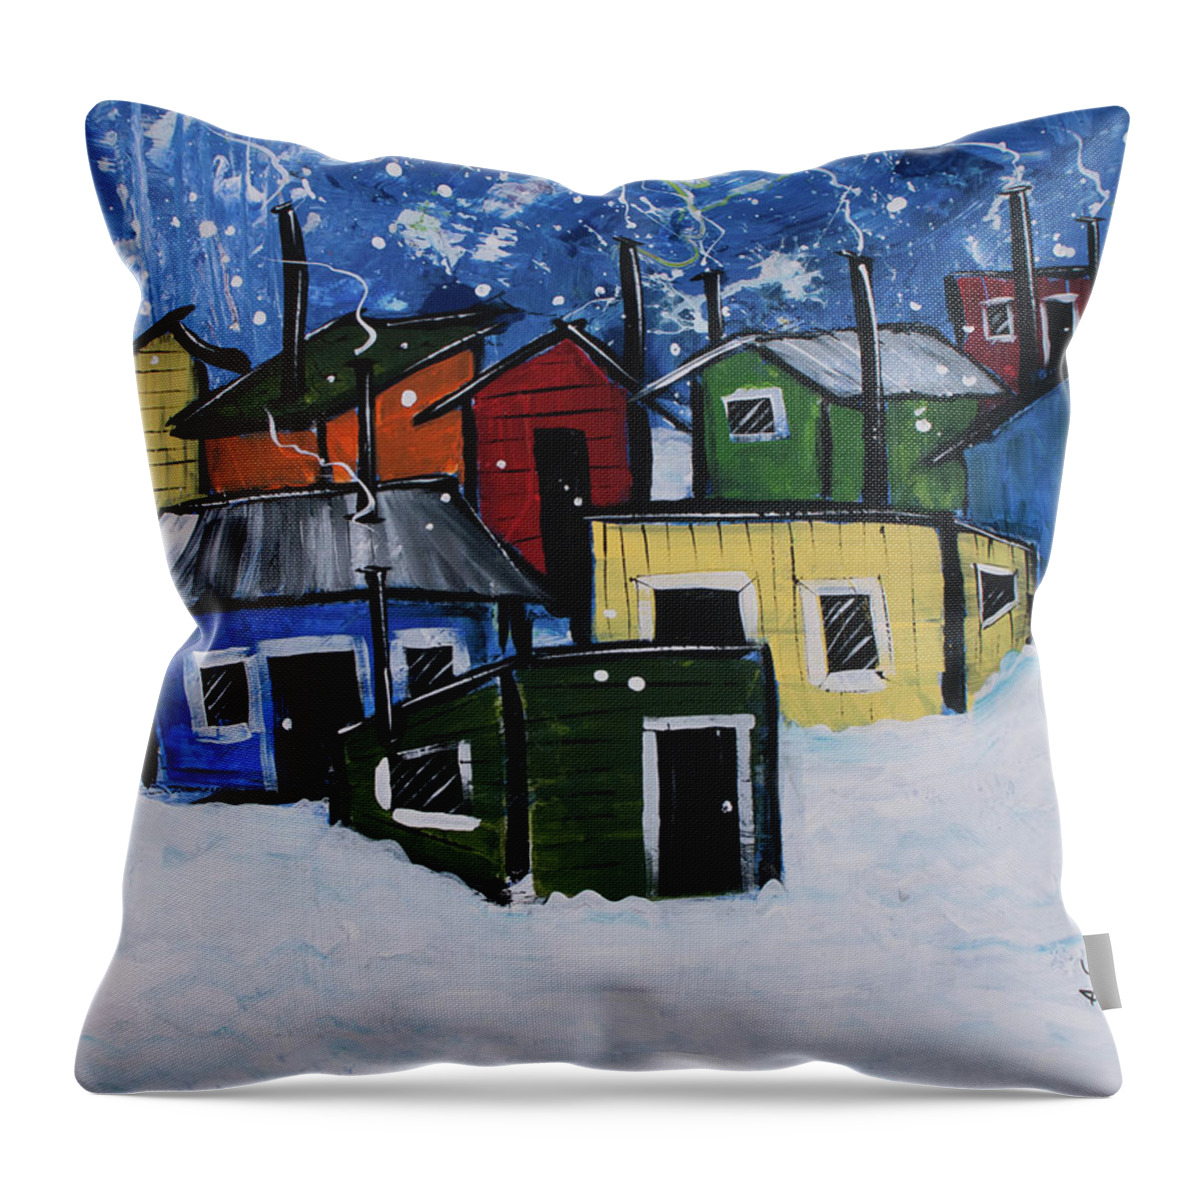 Ice Shanty Throw Pillow featuring the painting Ice Shantys by Terri Einer